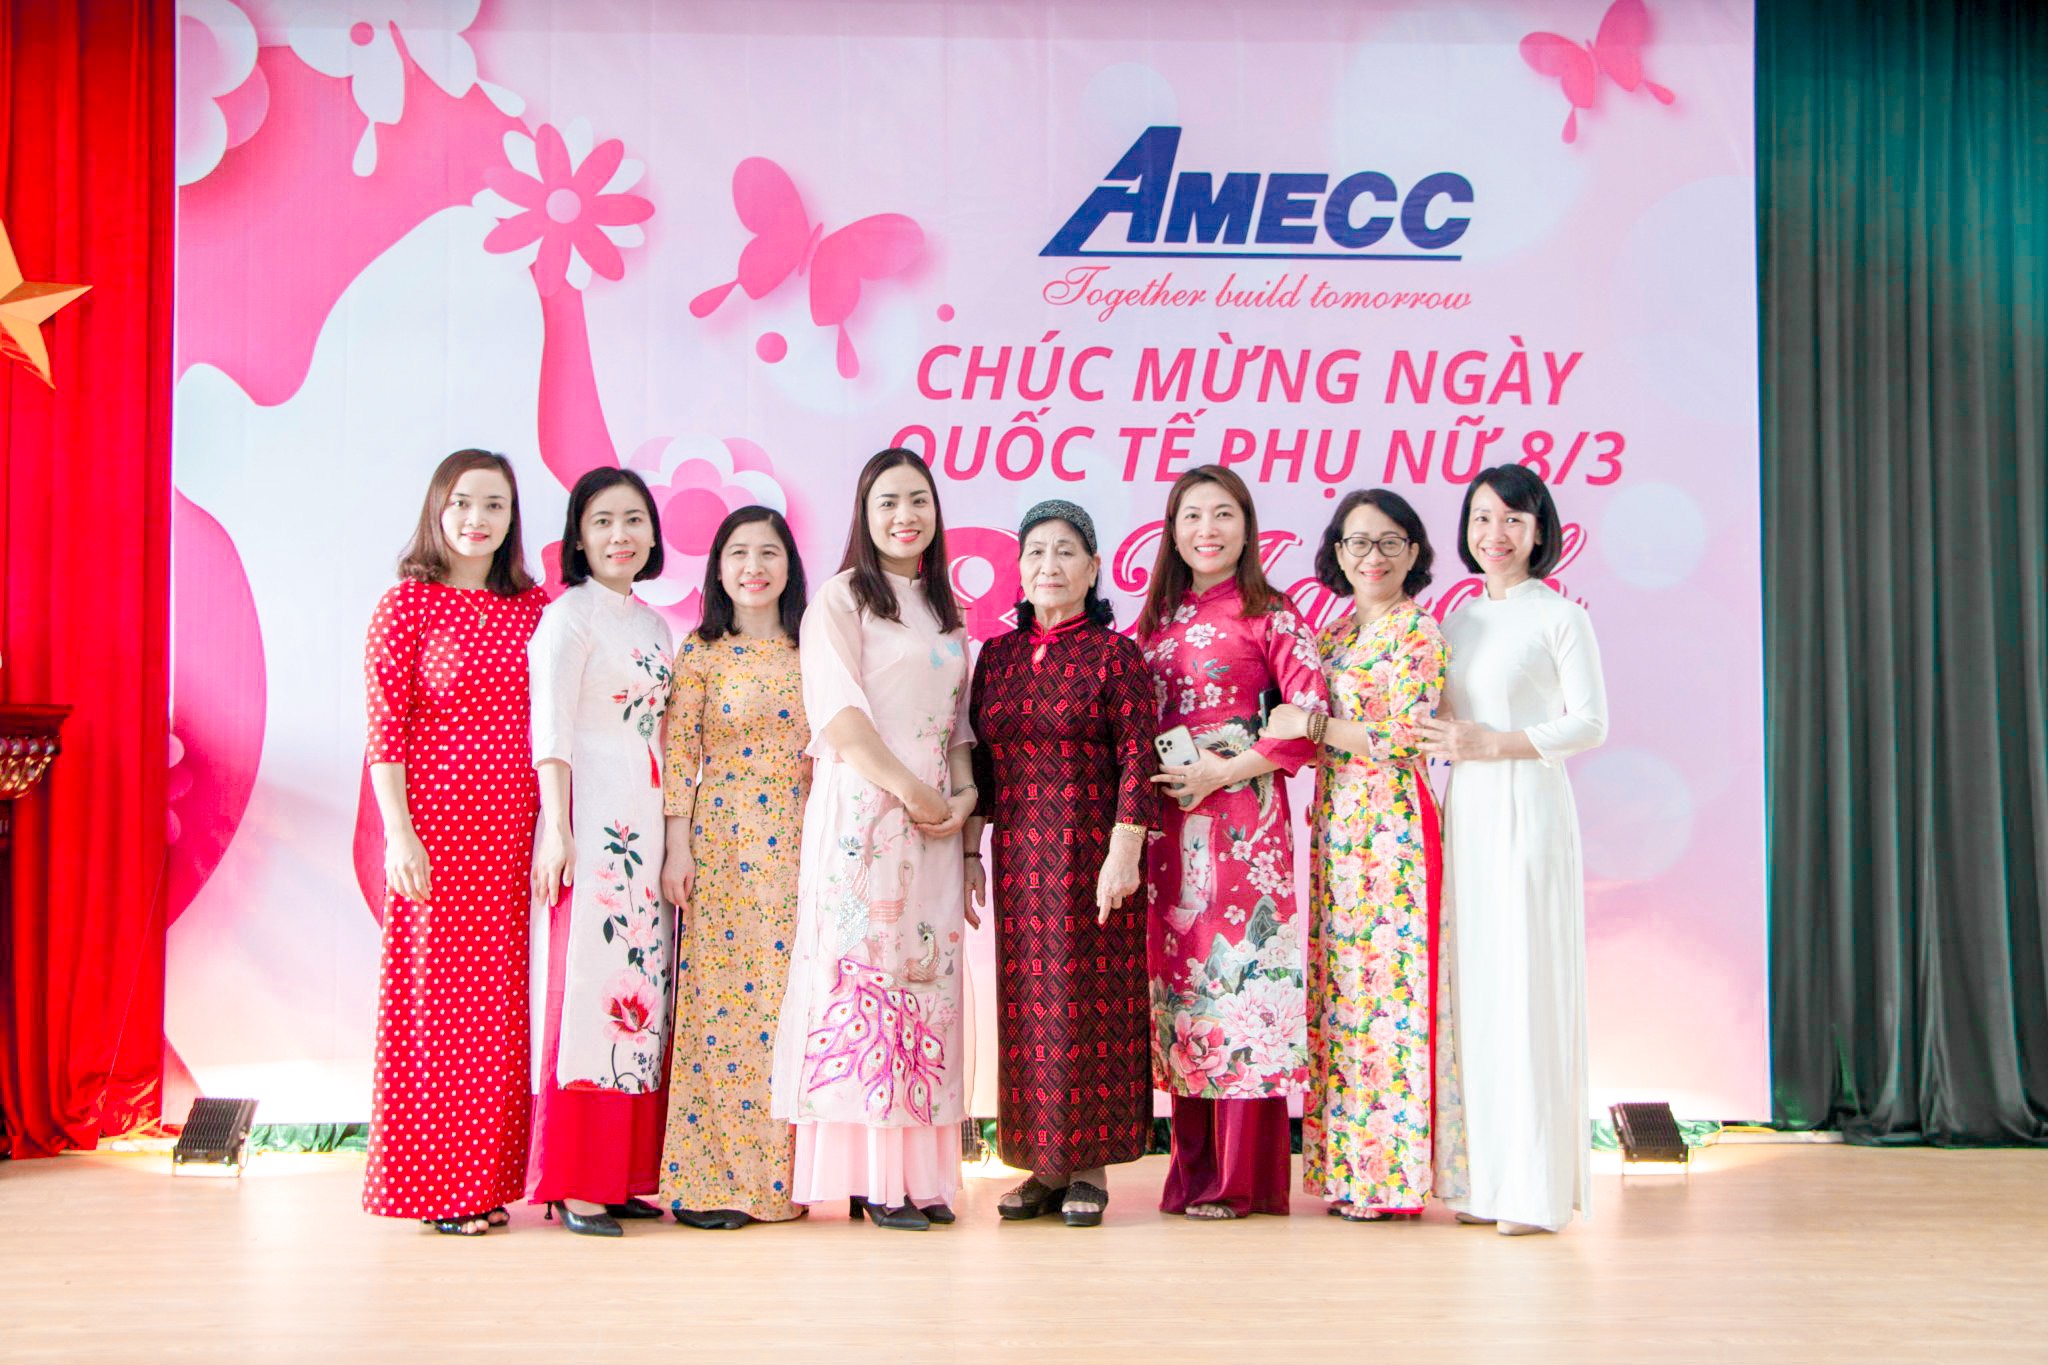 Amecc organizes a ceremony to celebrate International Women's Day on March 8th